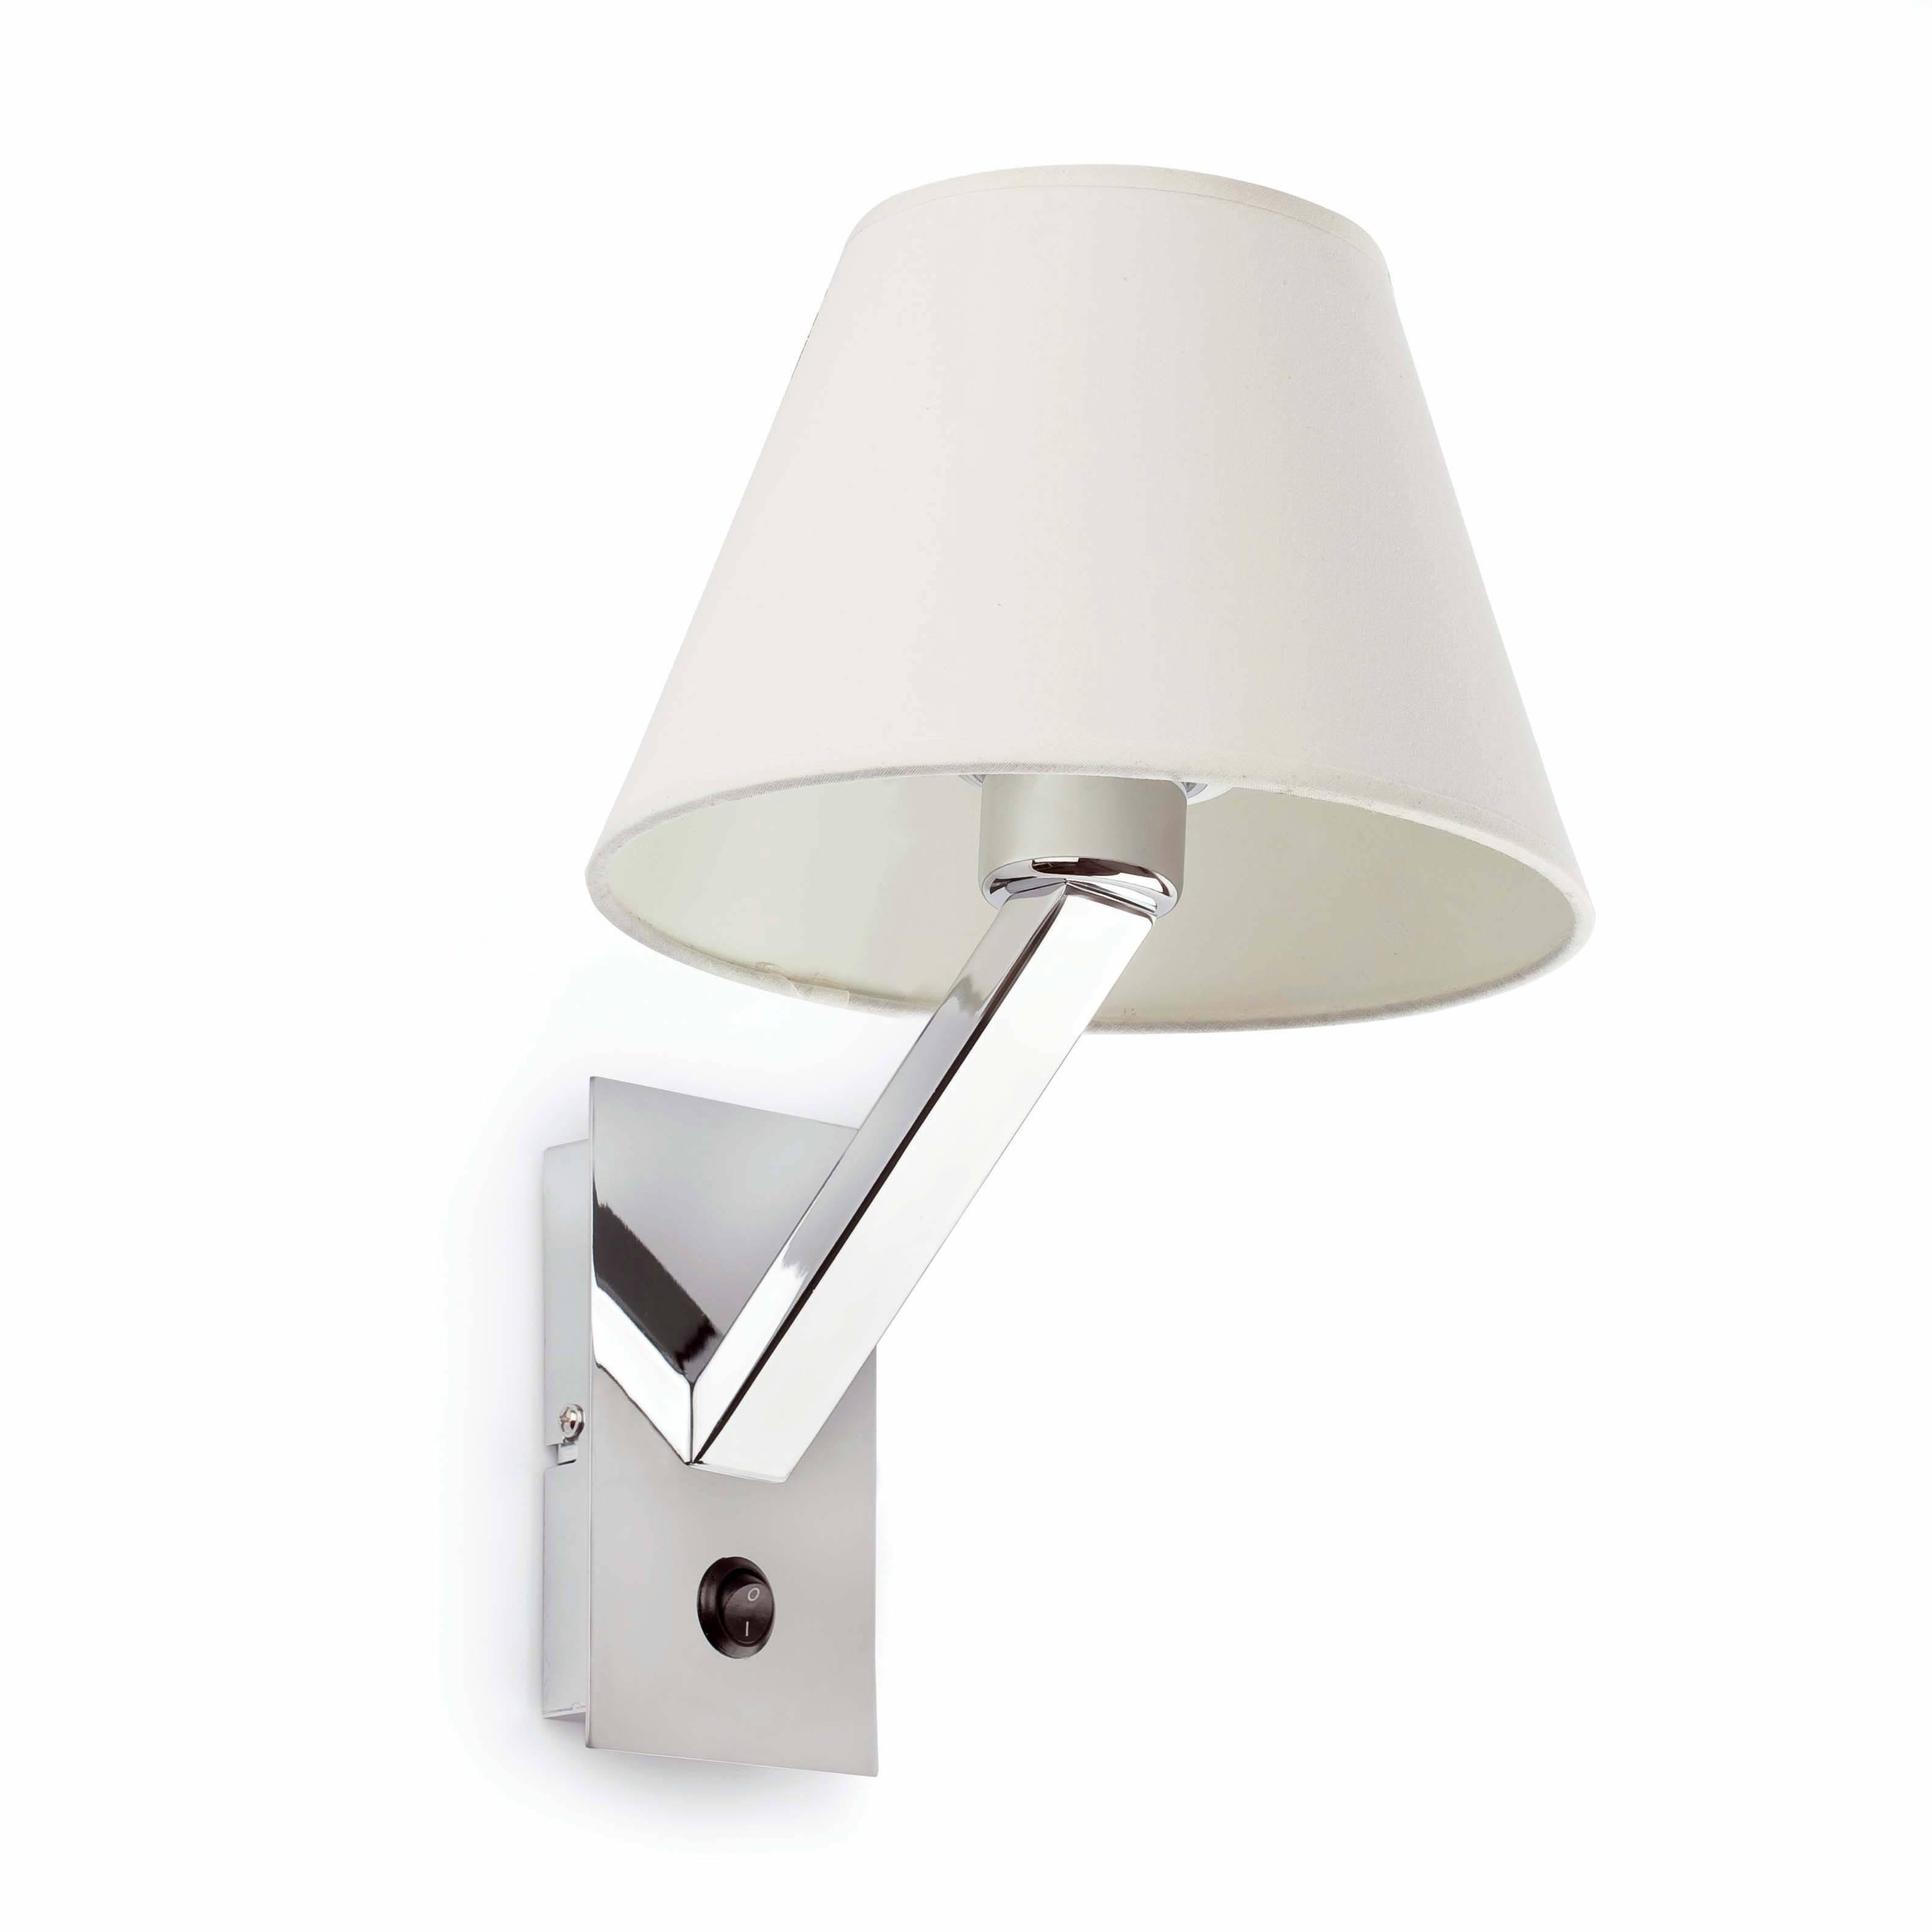 Moma 1 Light Indoor Wall Reading Light Chrome with White Shade E27 - image 1